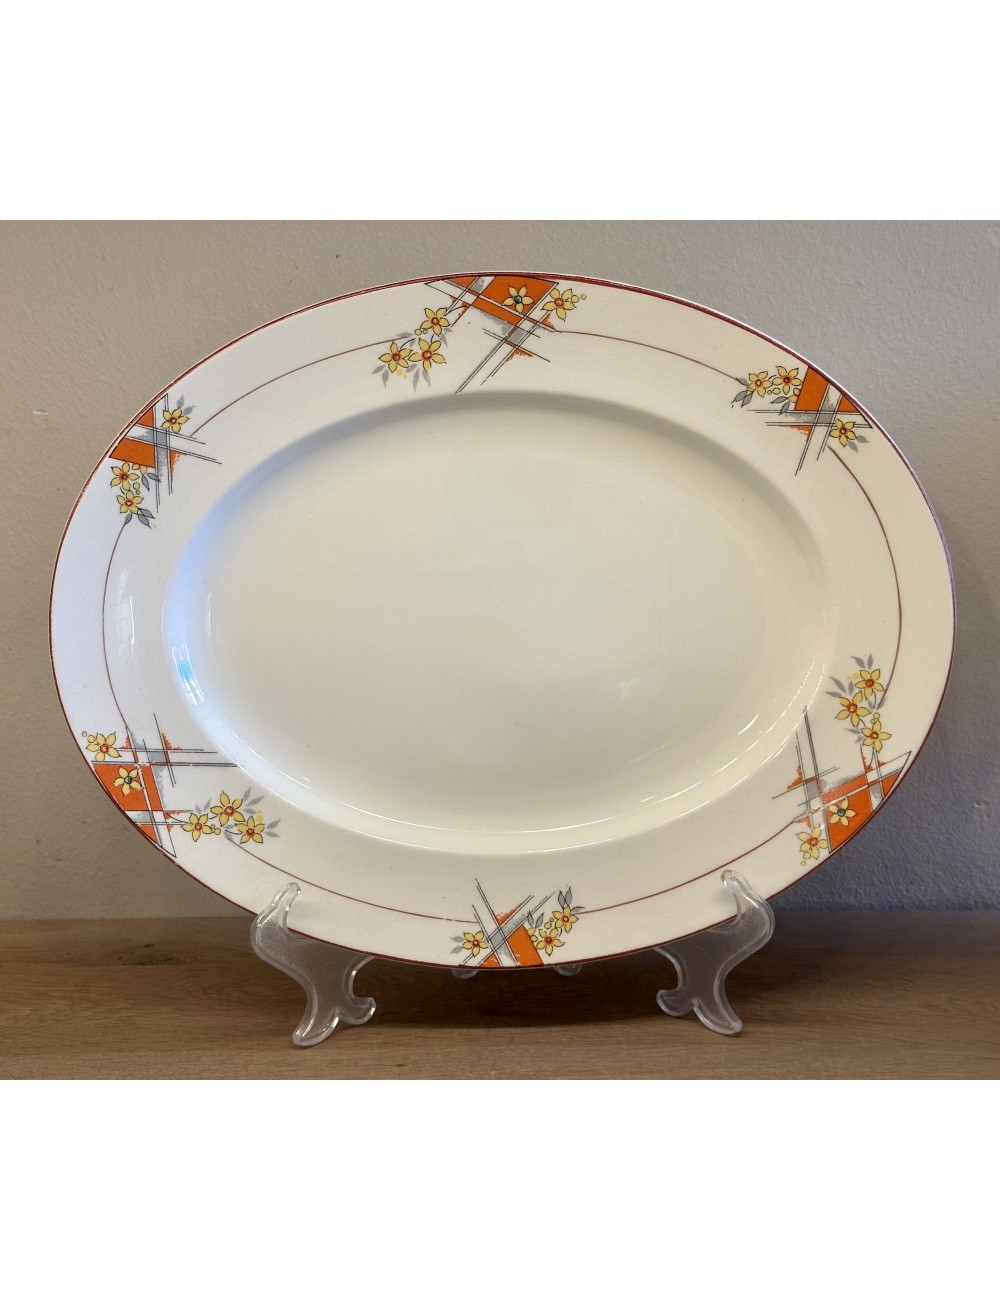 Plate - flat oval model - Art Deco - Empire England - décor executed in orange/yellow/black